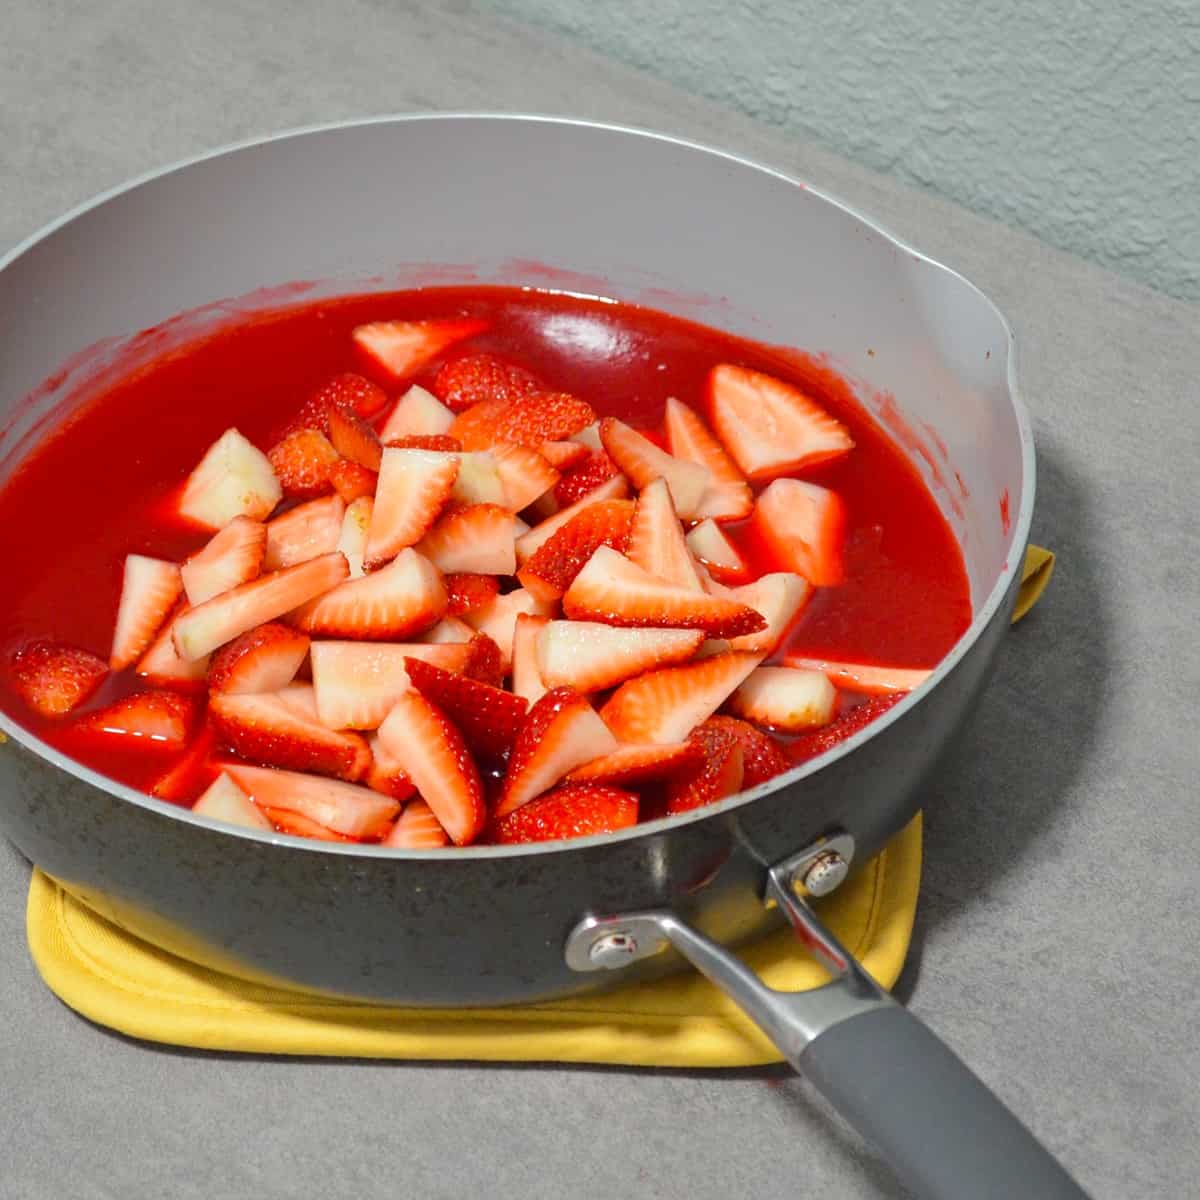 Skillet with jello mixture and strawberries